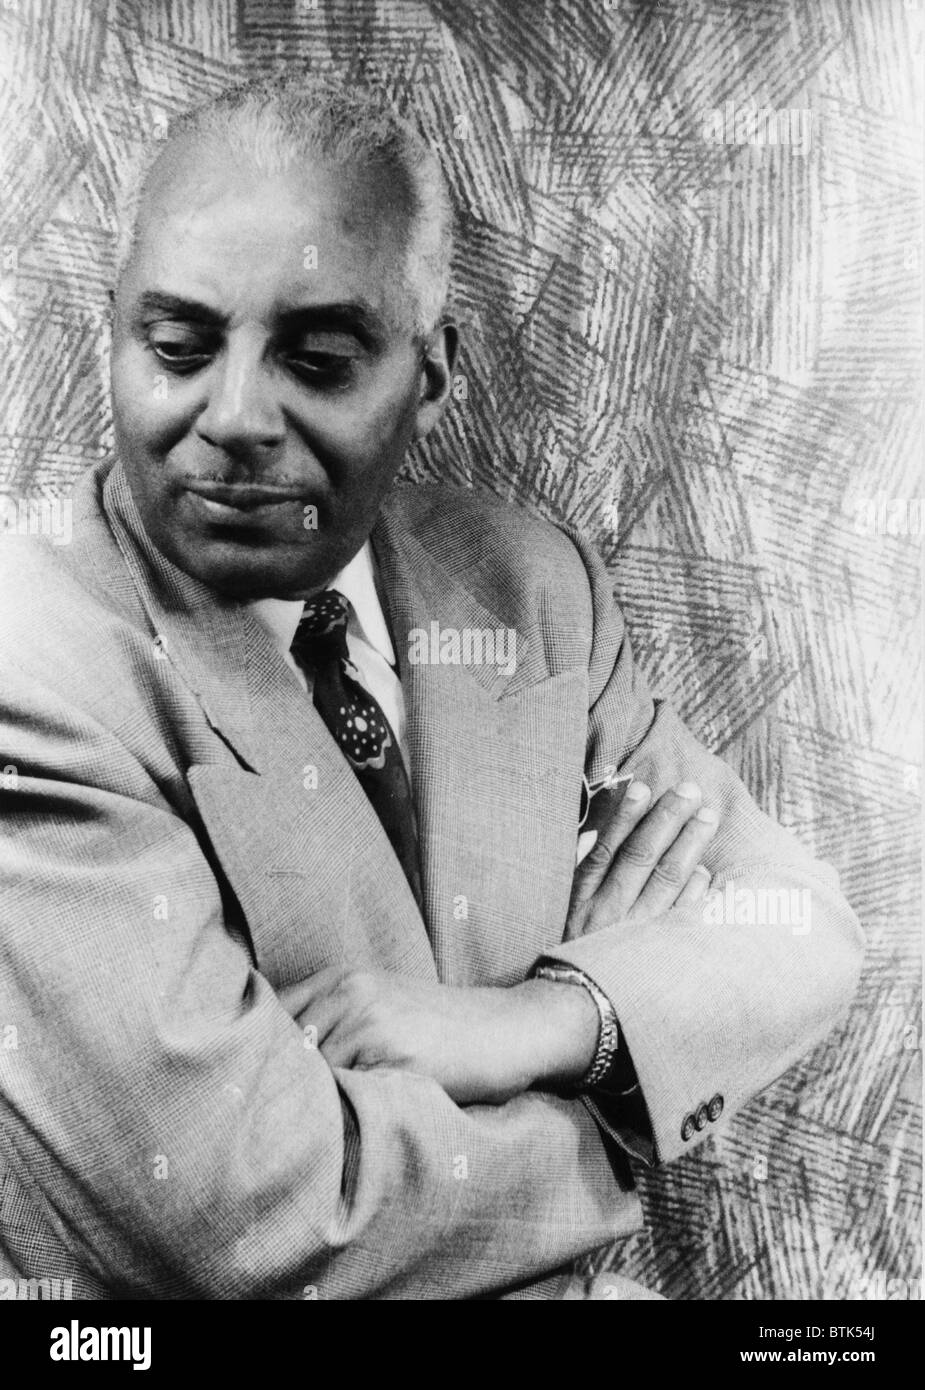 Noble Sissle (1889-1975), American jazz composer, lyricist, bandleader, singer and playwright. With Eubie Blake, he wrote songs Stock Photo